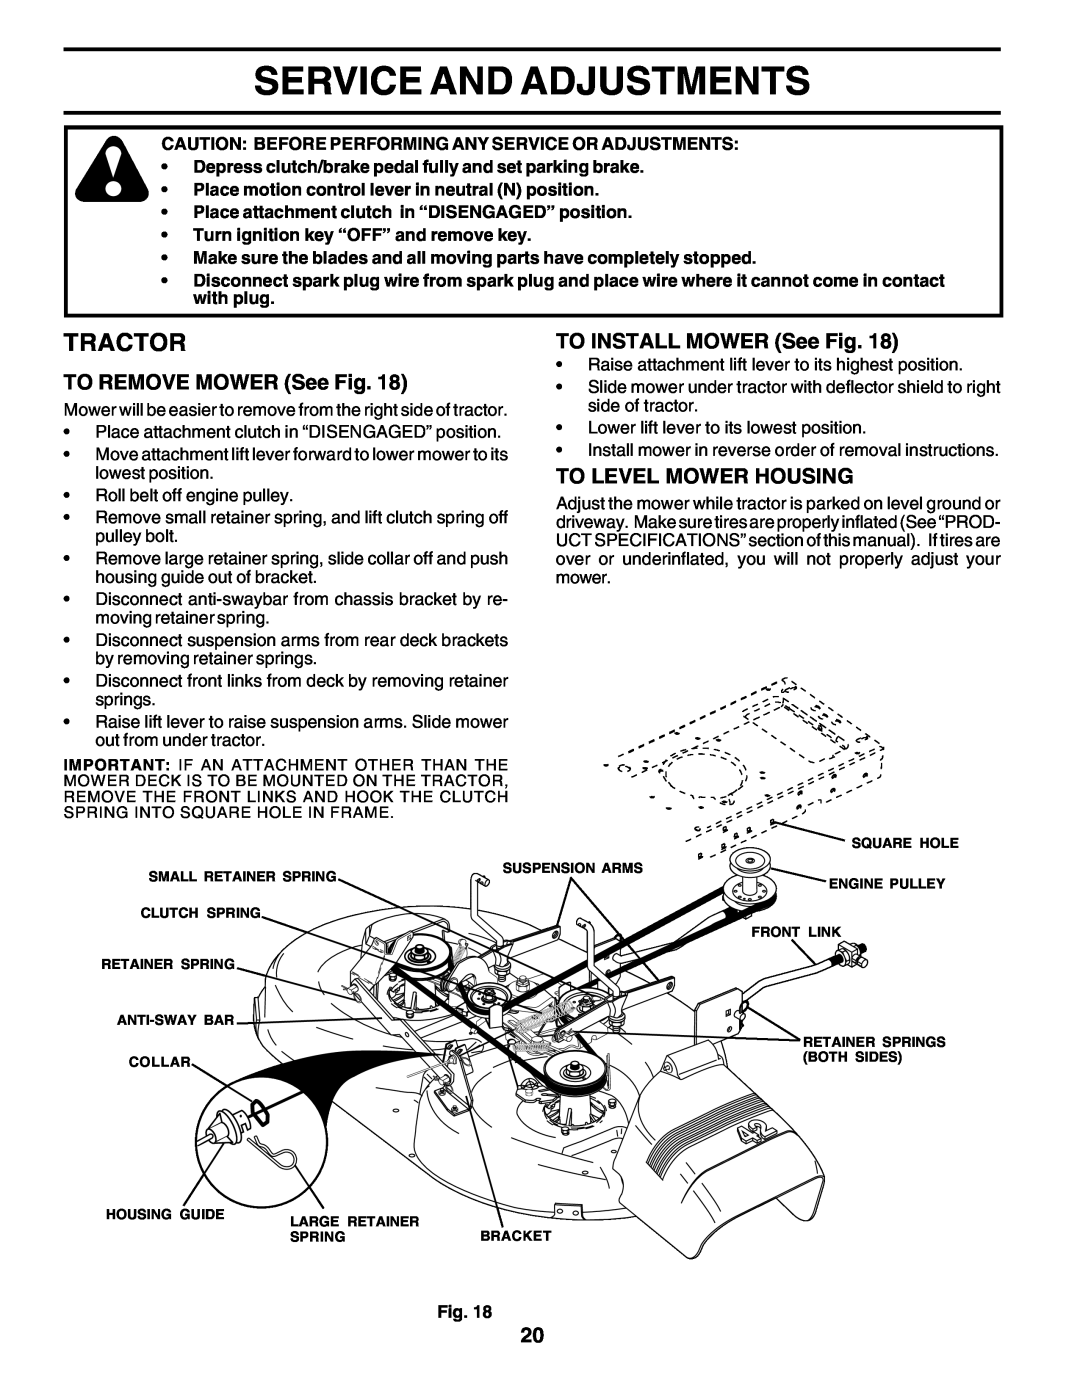 Poulan 180002 Service And Adjustments, Tractor, TO REMOVE MOWER See Fig, TO INSTALL MOWER See Fig, To Level Mower Housing 